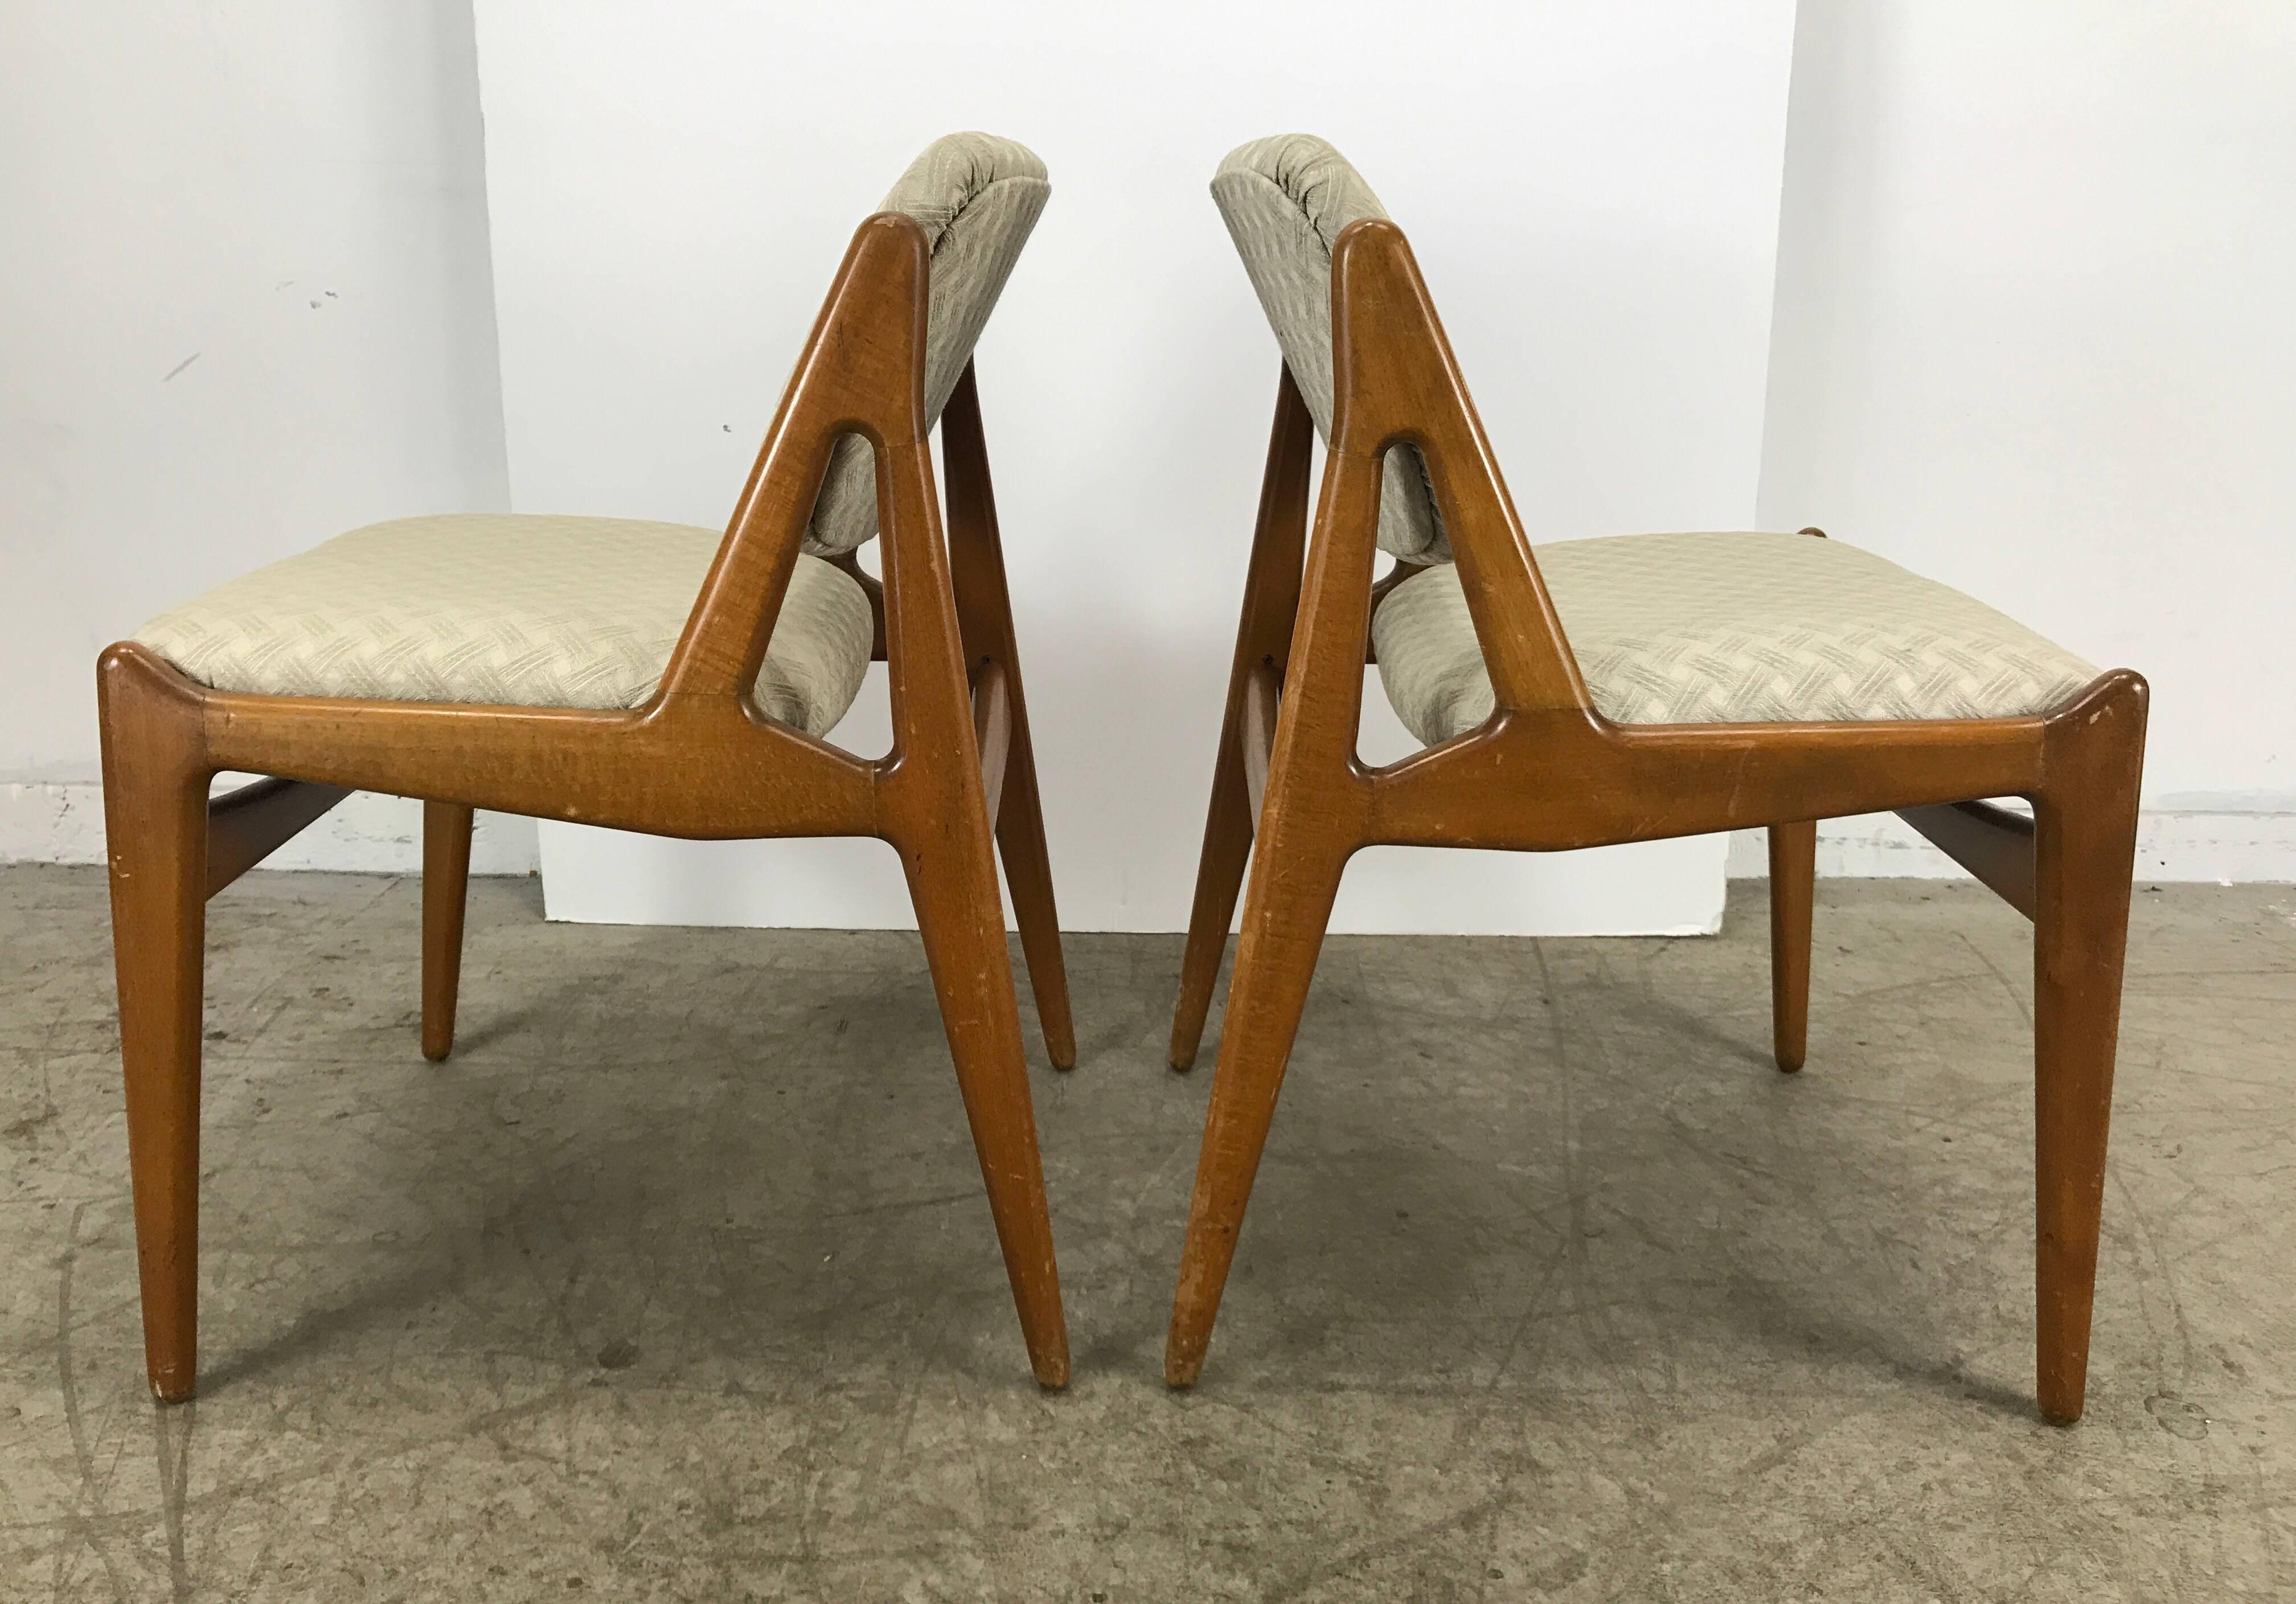 20th Century Set of Four Solid Sculptural Teak Dining Chairs by Arne Vodder, Denmark